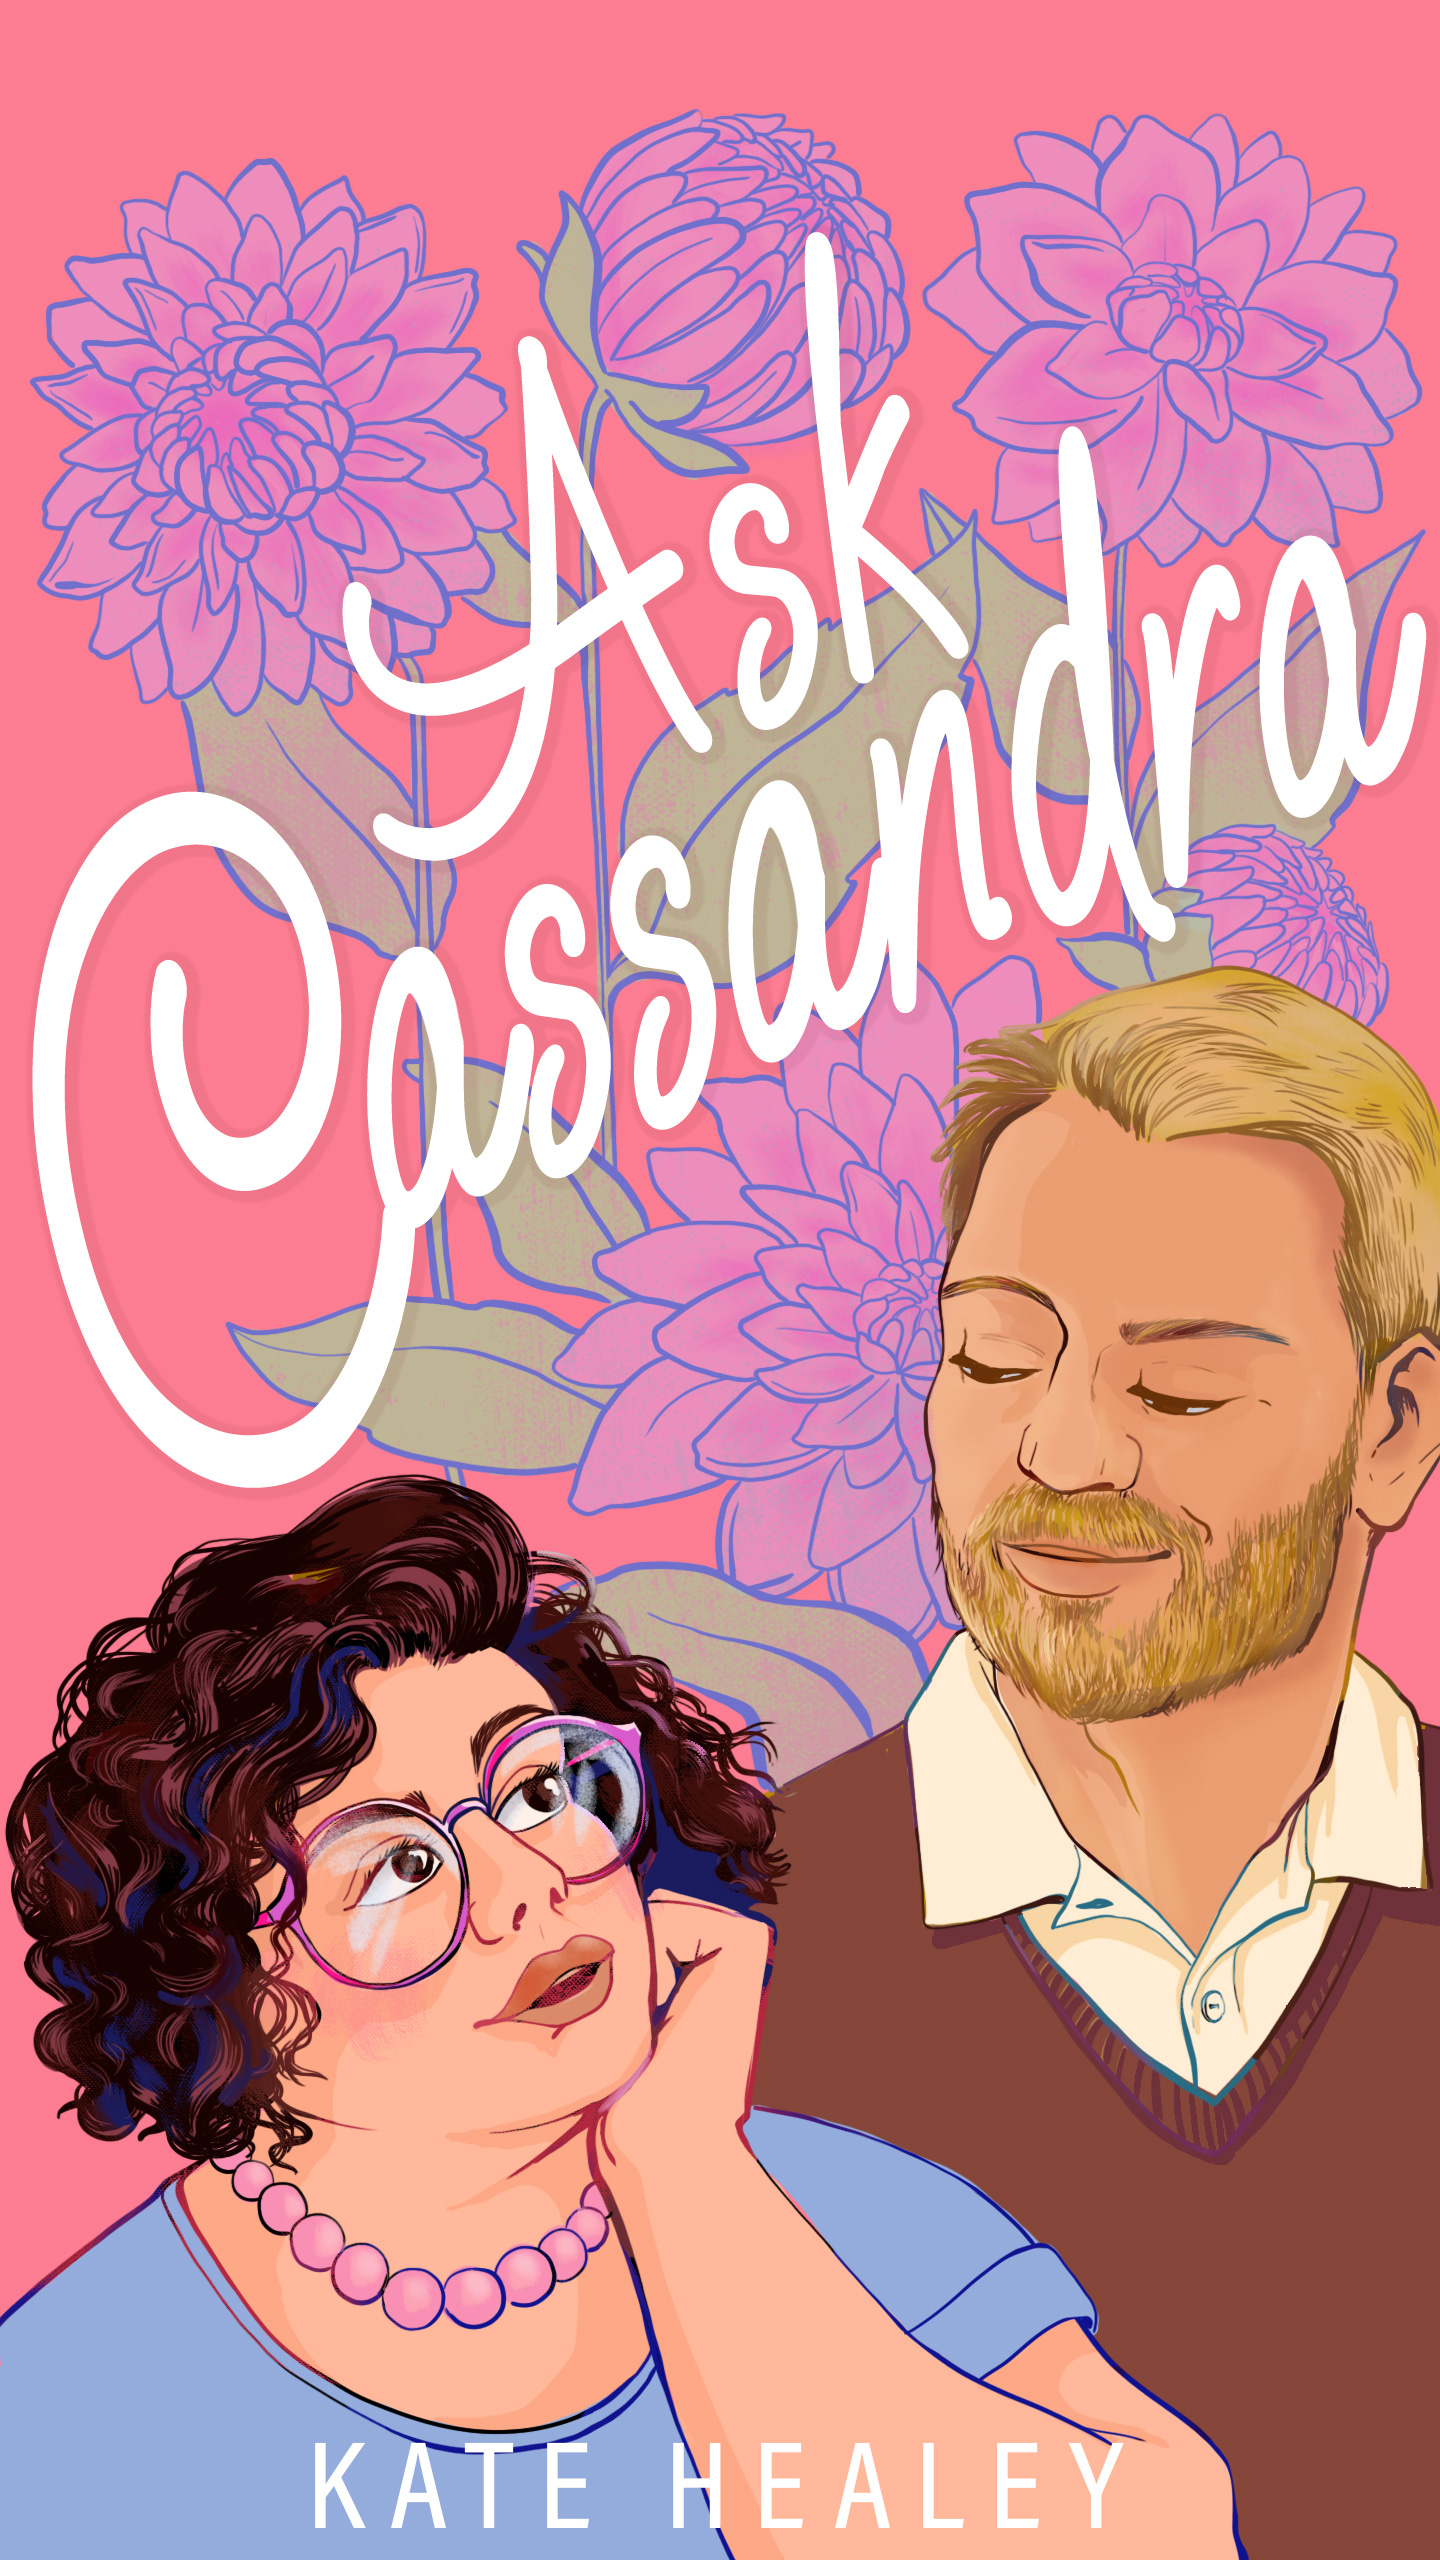 A peach background with pink dahlia's and Ask Cassandra in white handwriting as a title. Head and shoulders portrait of the protagonists: a fat white woman with a curly bob, wearing a cardigan and retro round beads, with big glasses, looks up into the eyes of a smiling blond, bearded man wearing a V-neck sweater over a button-up, like the ex-frat boy he is.